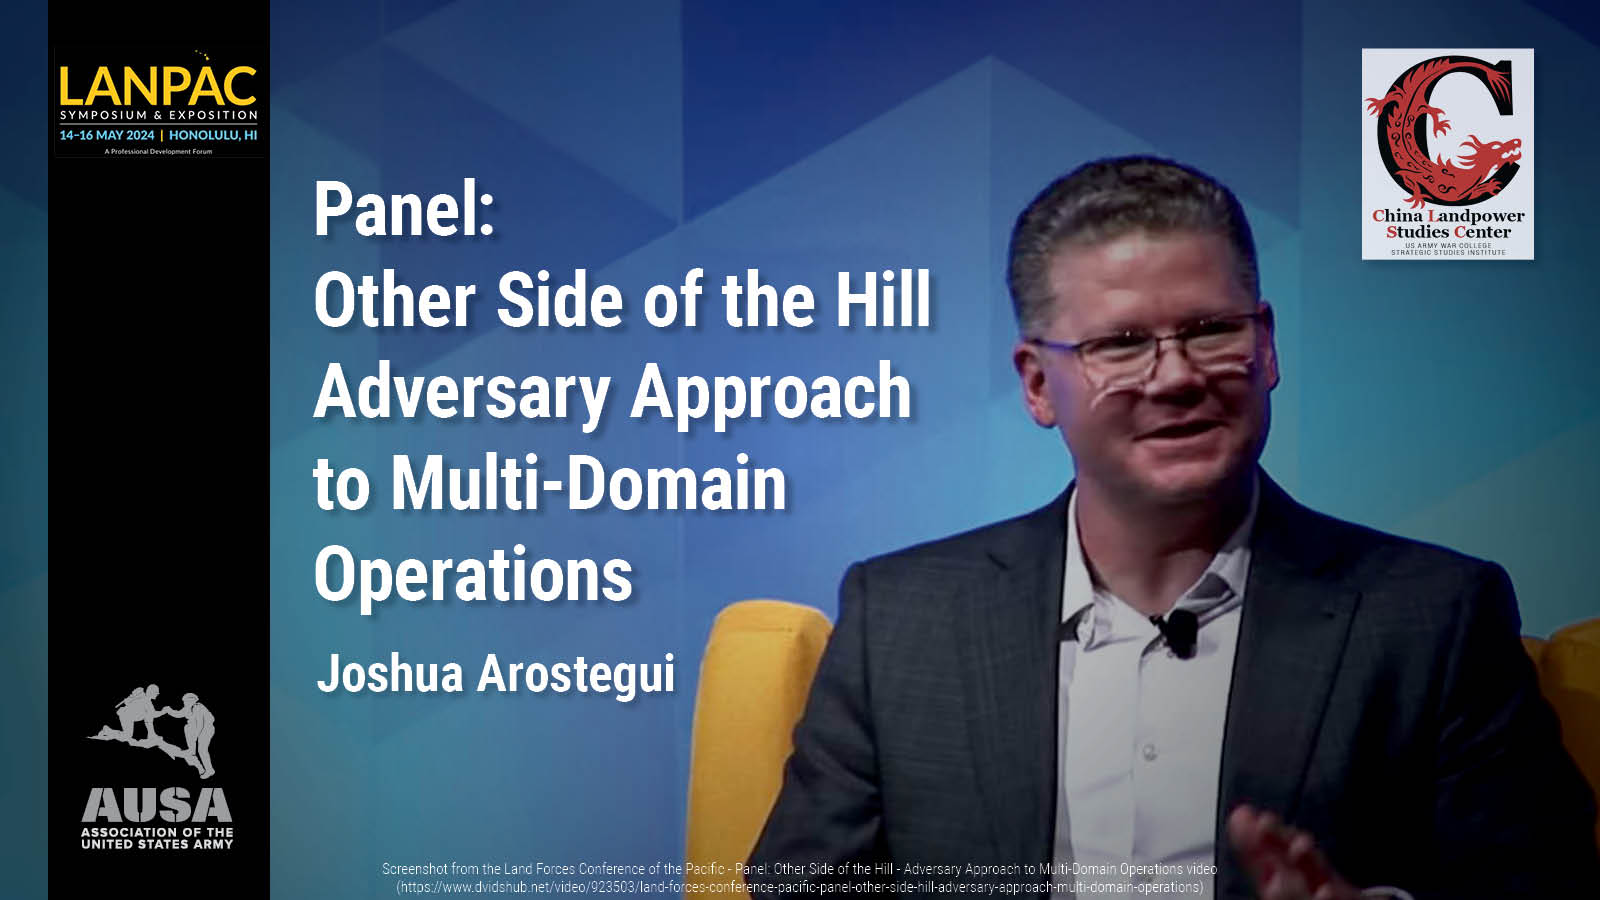 AUSA LANPAC Panel: Other Side of the Hill Adversary Approach to Multi-Domain Operations
| Joshua Arostegui